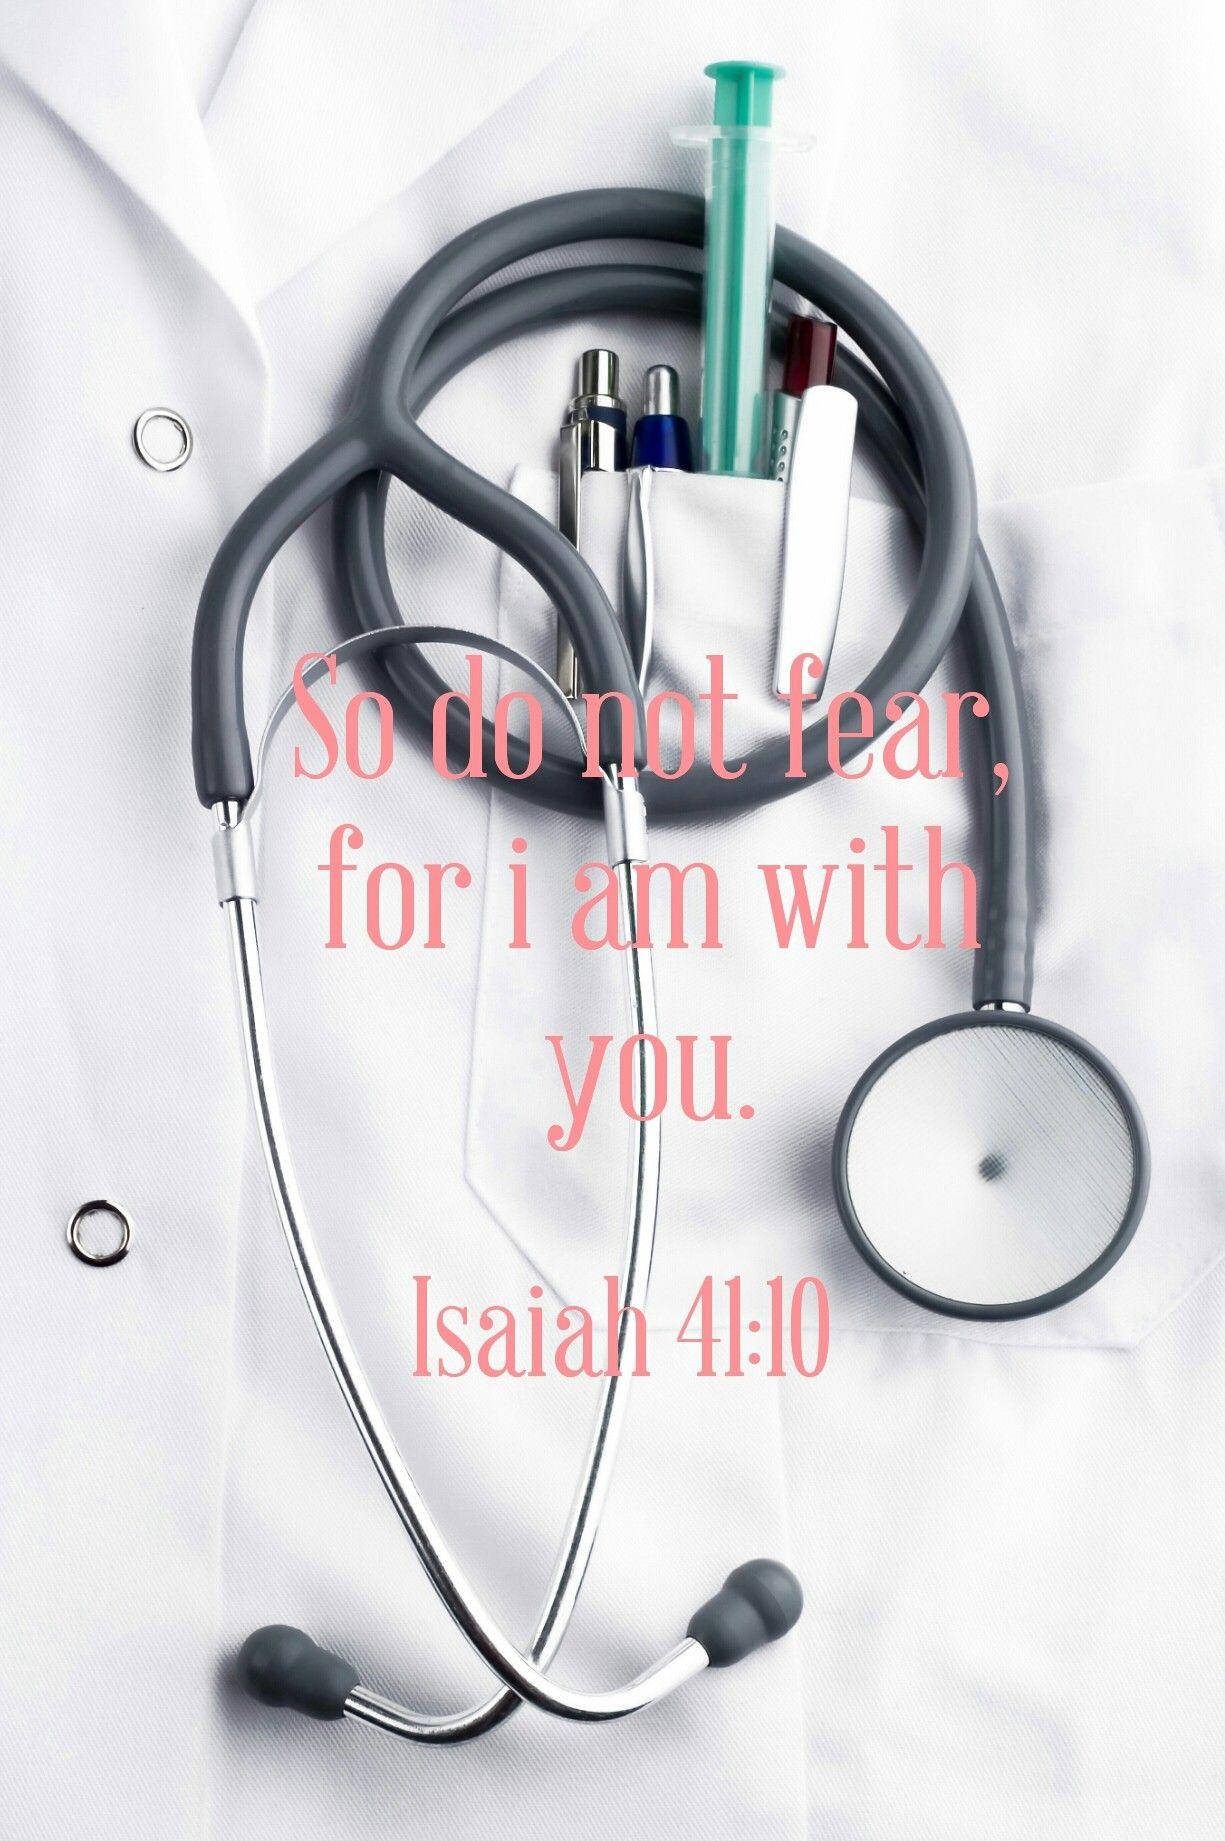 Isaiah Quote Medical Motivation Poster Wallpaper